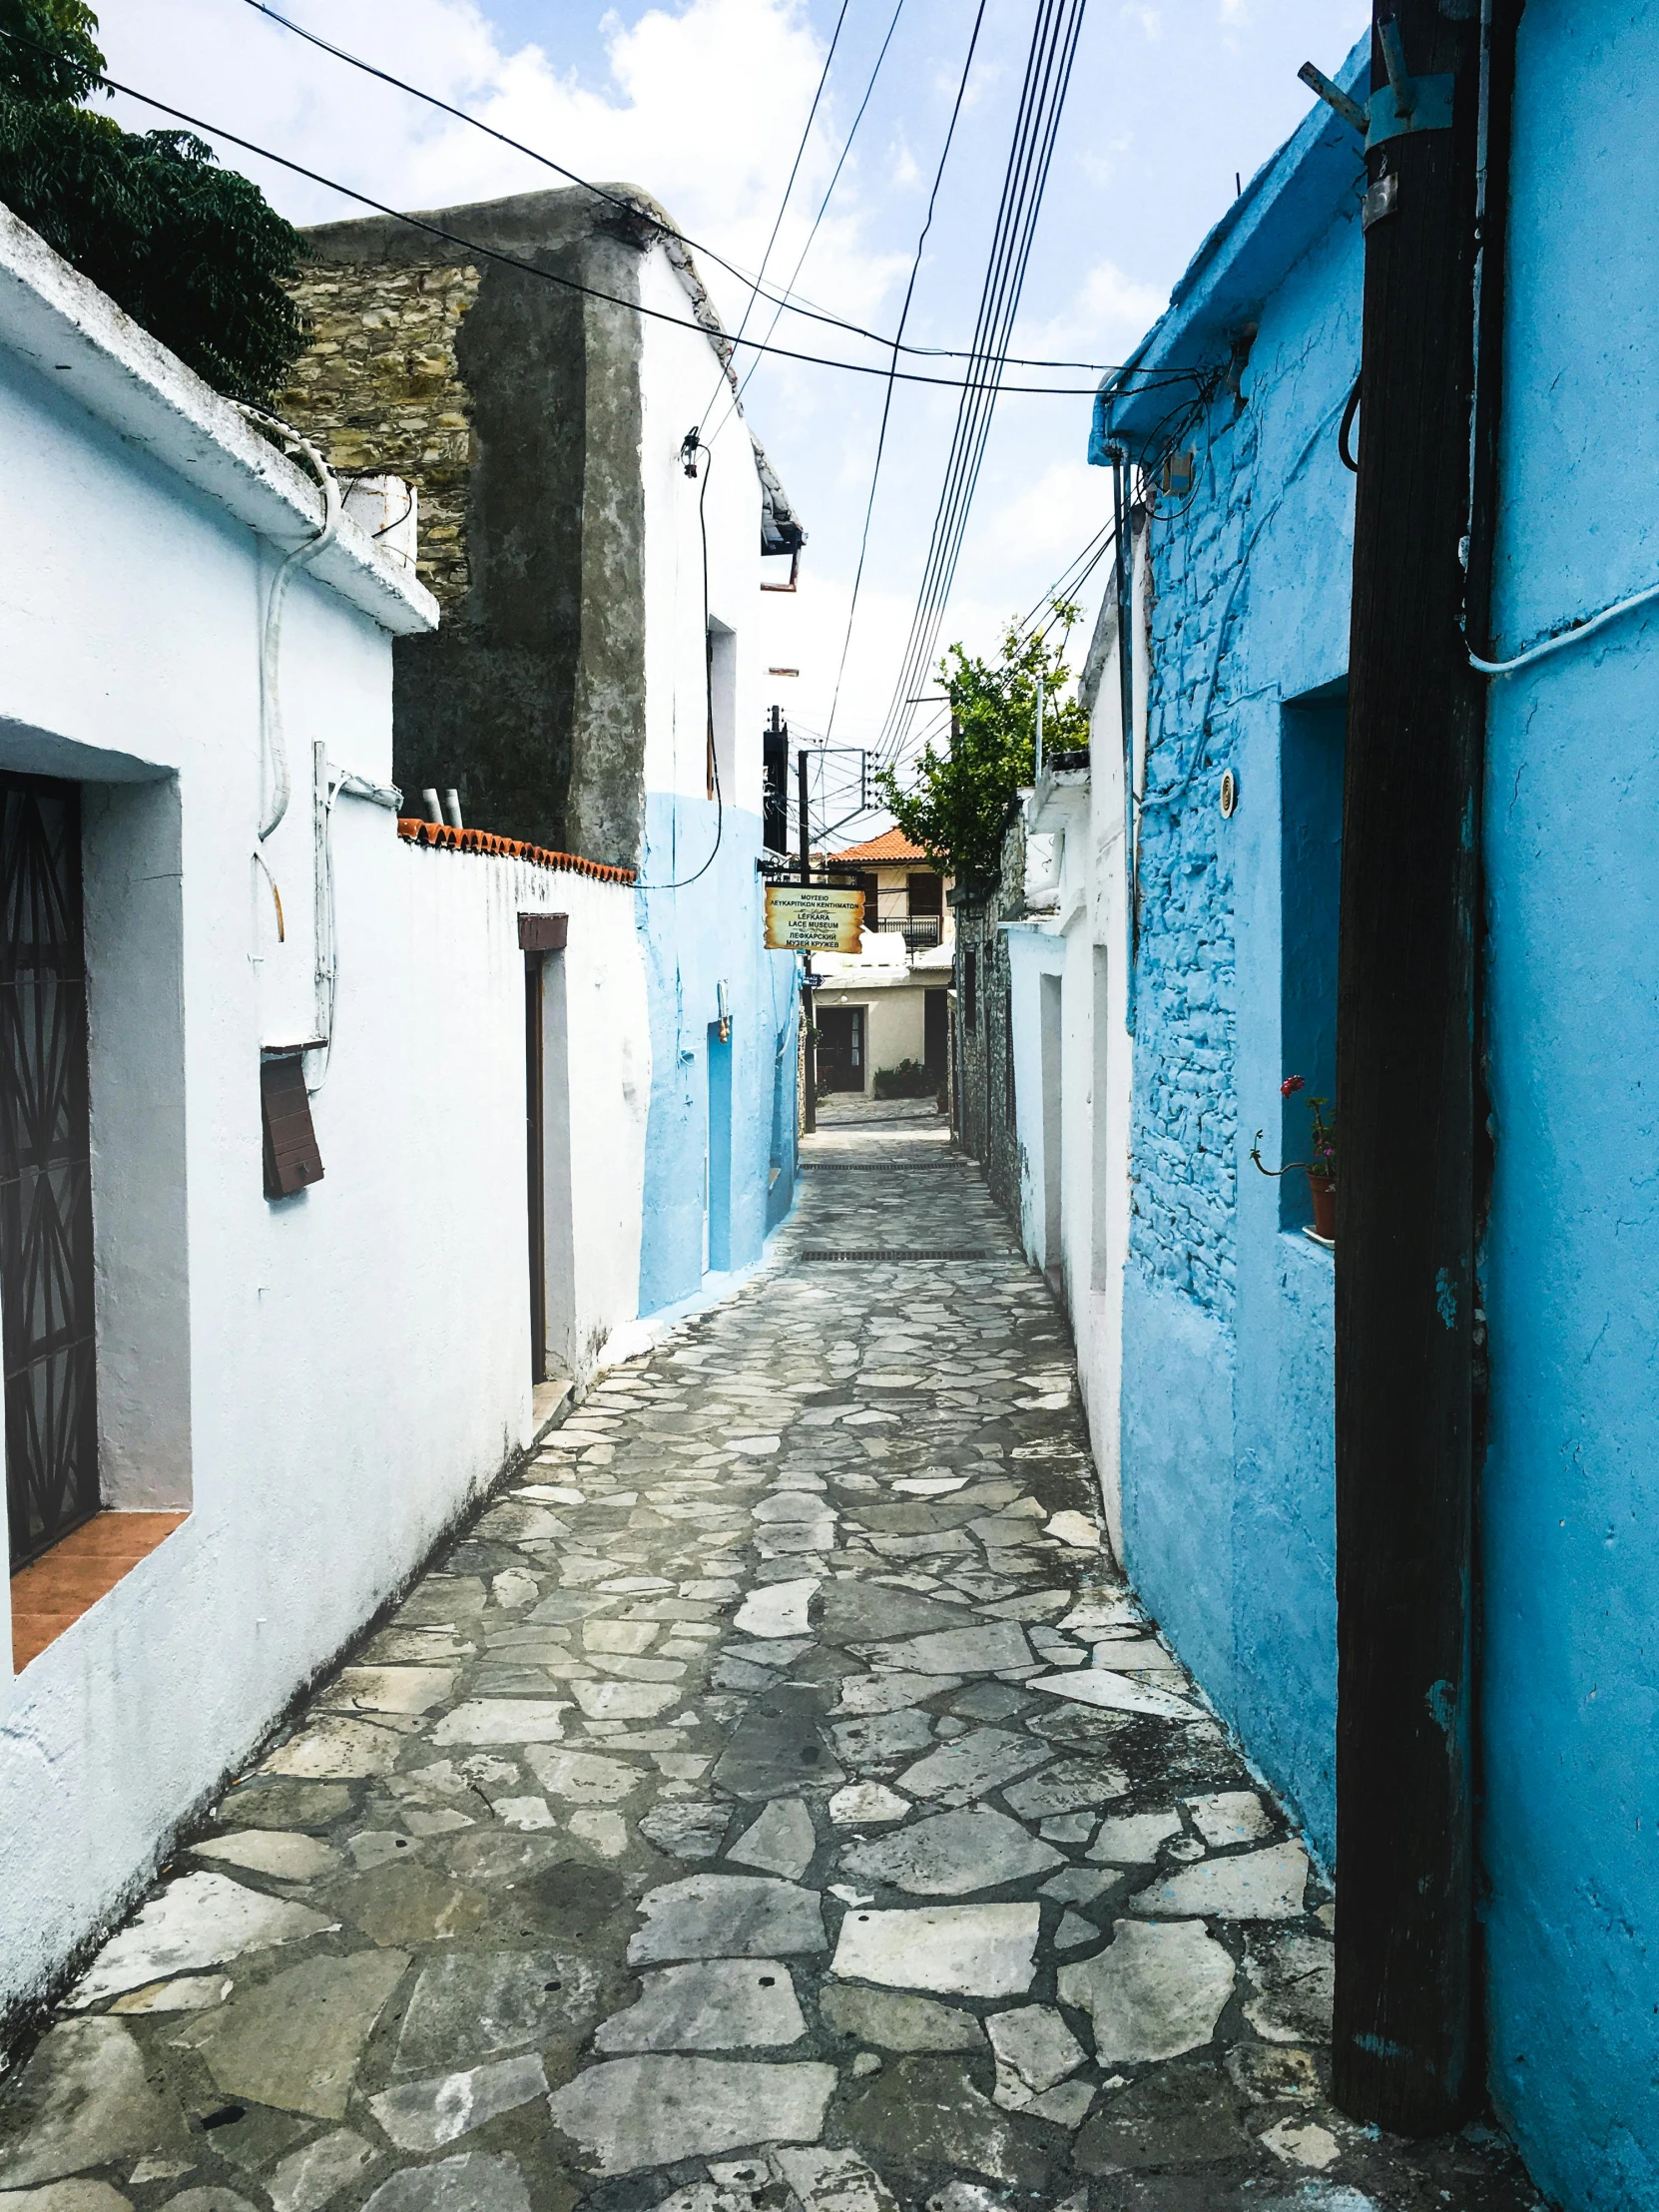 an alley in a town, with blue walls and cobblestones